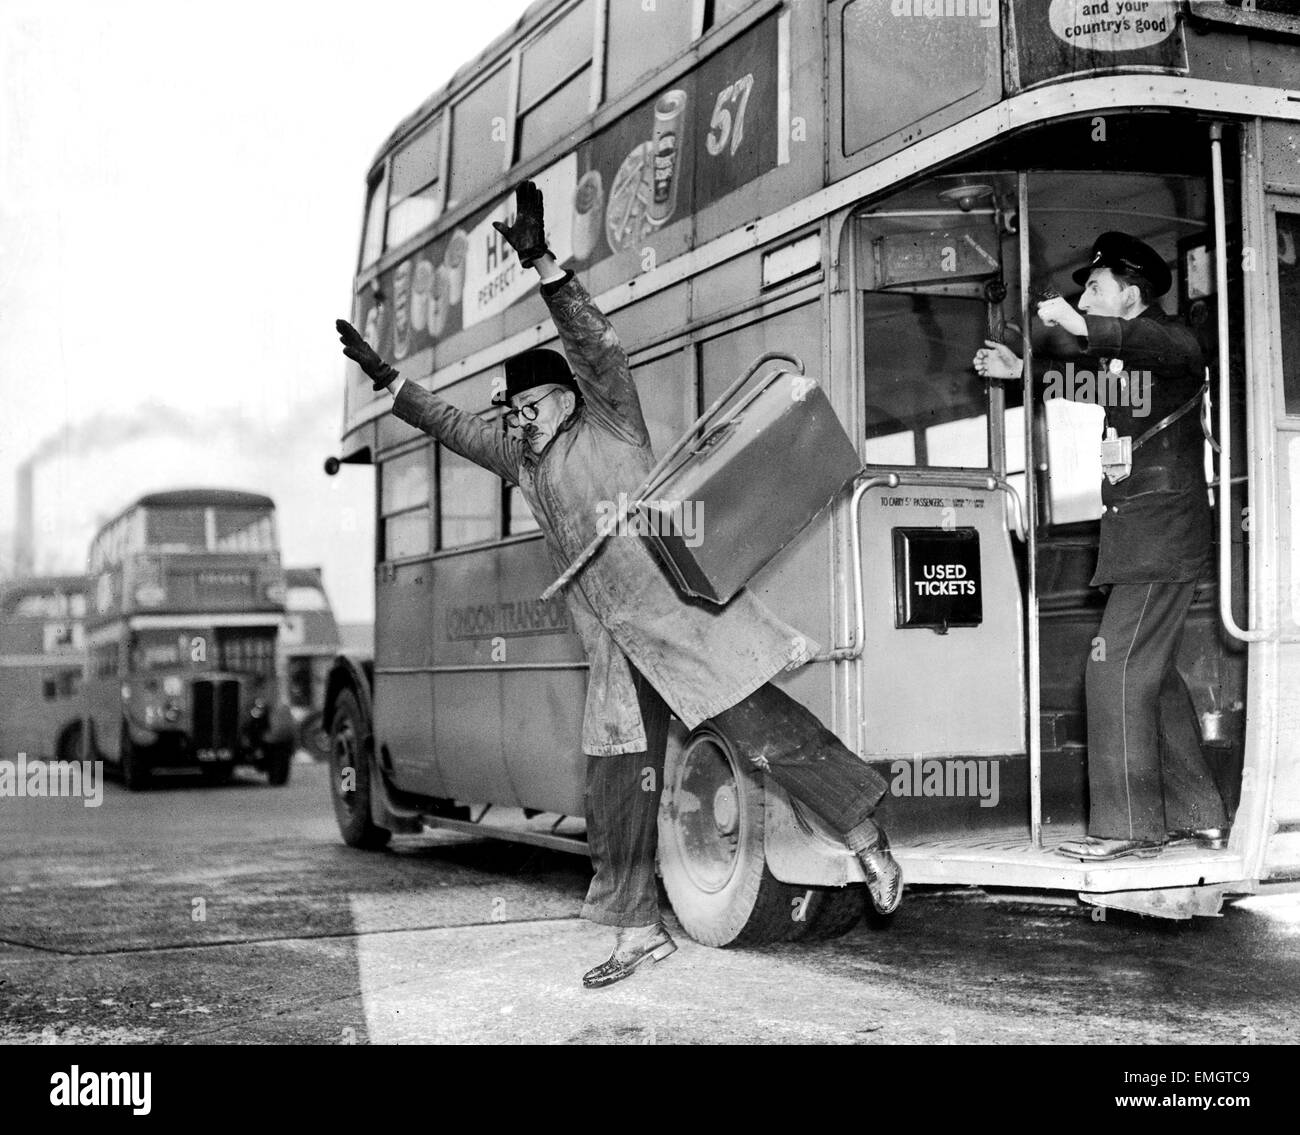 Albert Fisher 'Bumps' of Willesden earns his living by falling off London buses. He is part of the Chiswick Accident Demonstration Unit of the London Transport Executive and takes part in demonstrations to show bus drivers and conductors how accidentsa re caused and how they can be avoided. 6th December 1950. Stock Photo